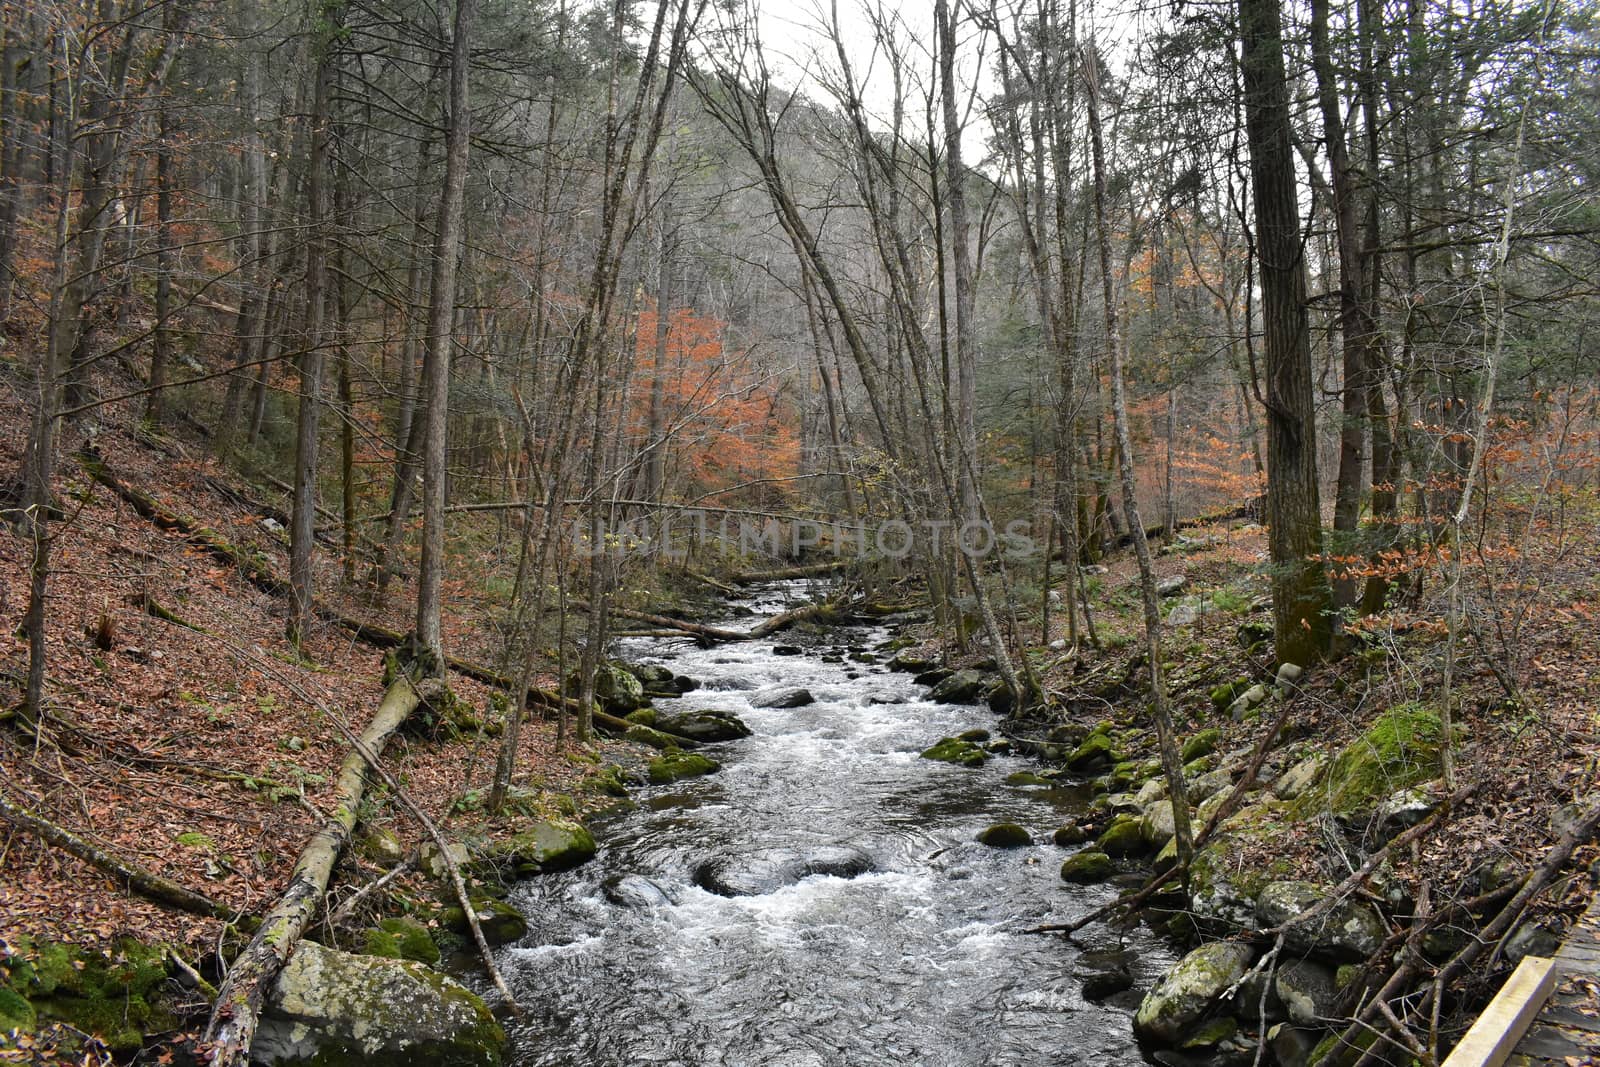 A Fast Flowing River in a Dead Autumn Forest Surrounded by Foliage